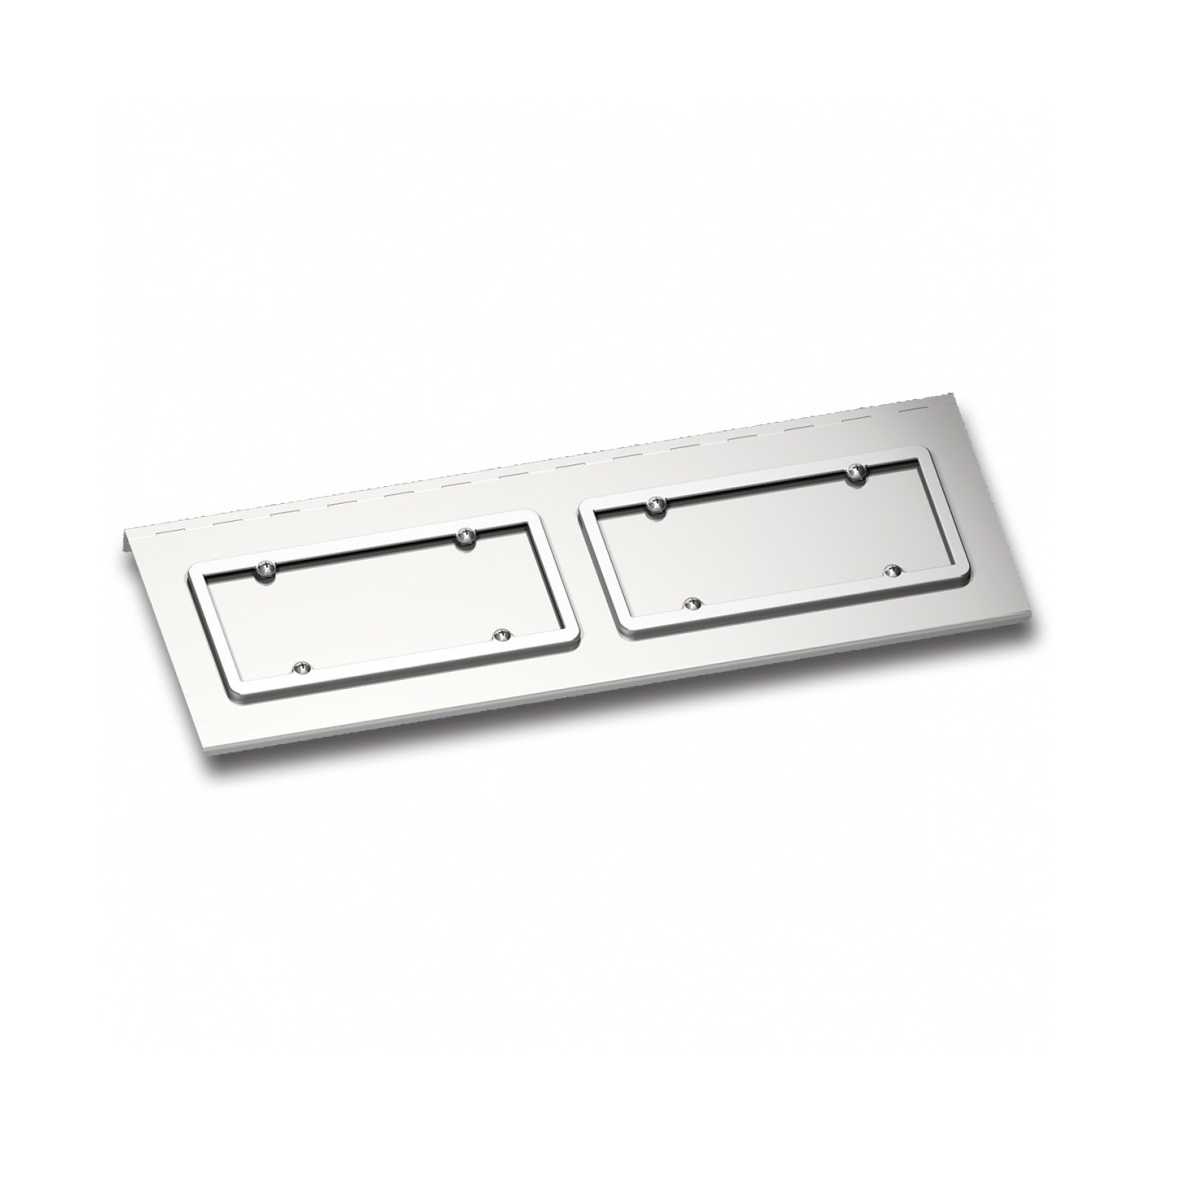 Dual License Swing Plate for Kenworth W900 with Texas Style Bumper - Polished Stainless Steel